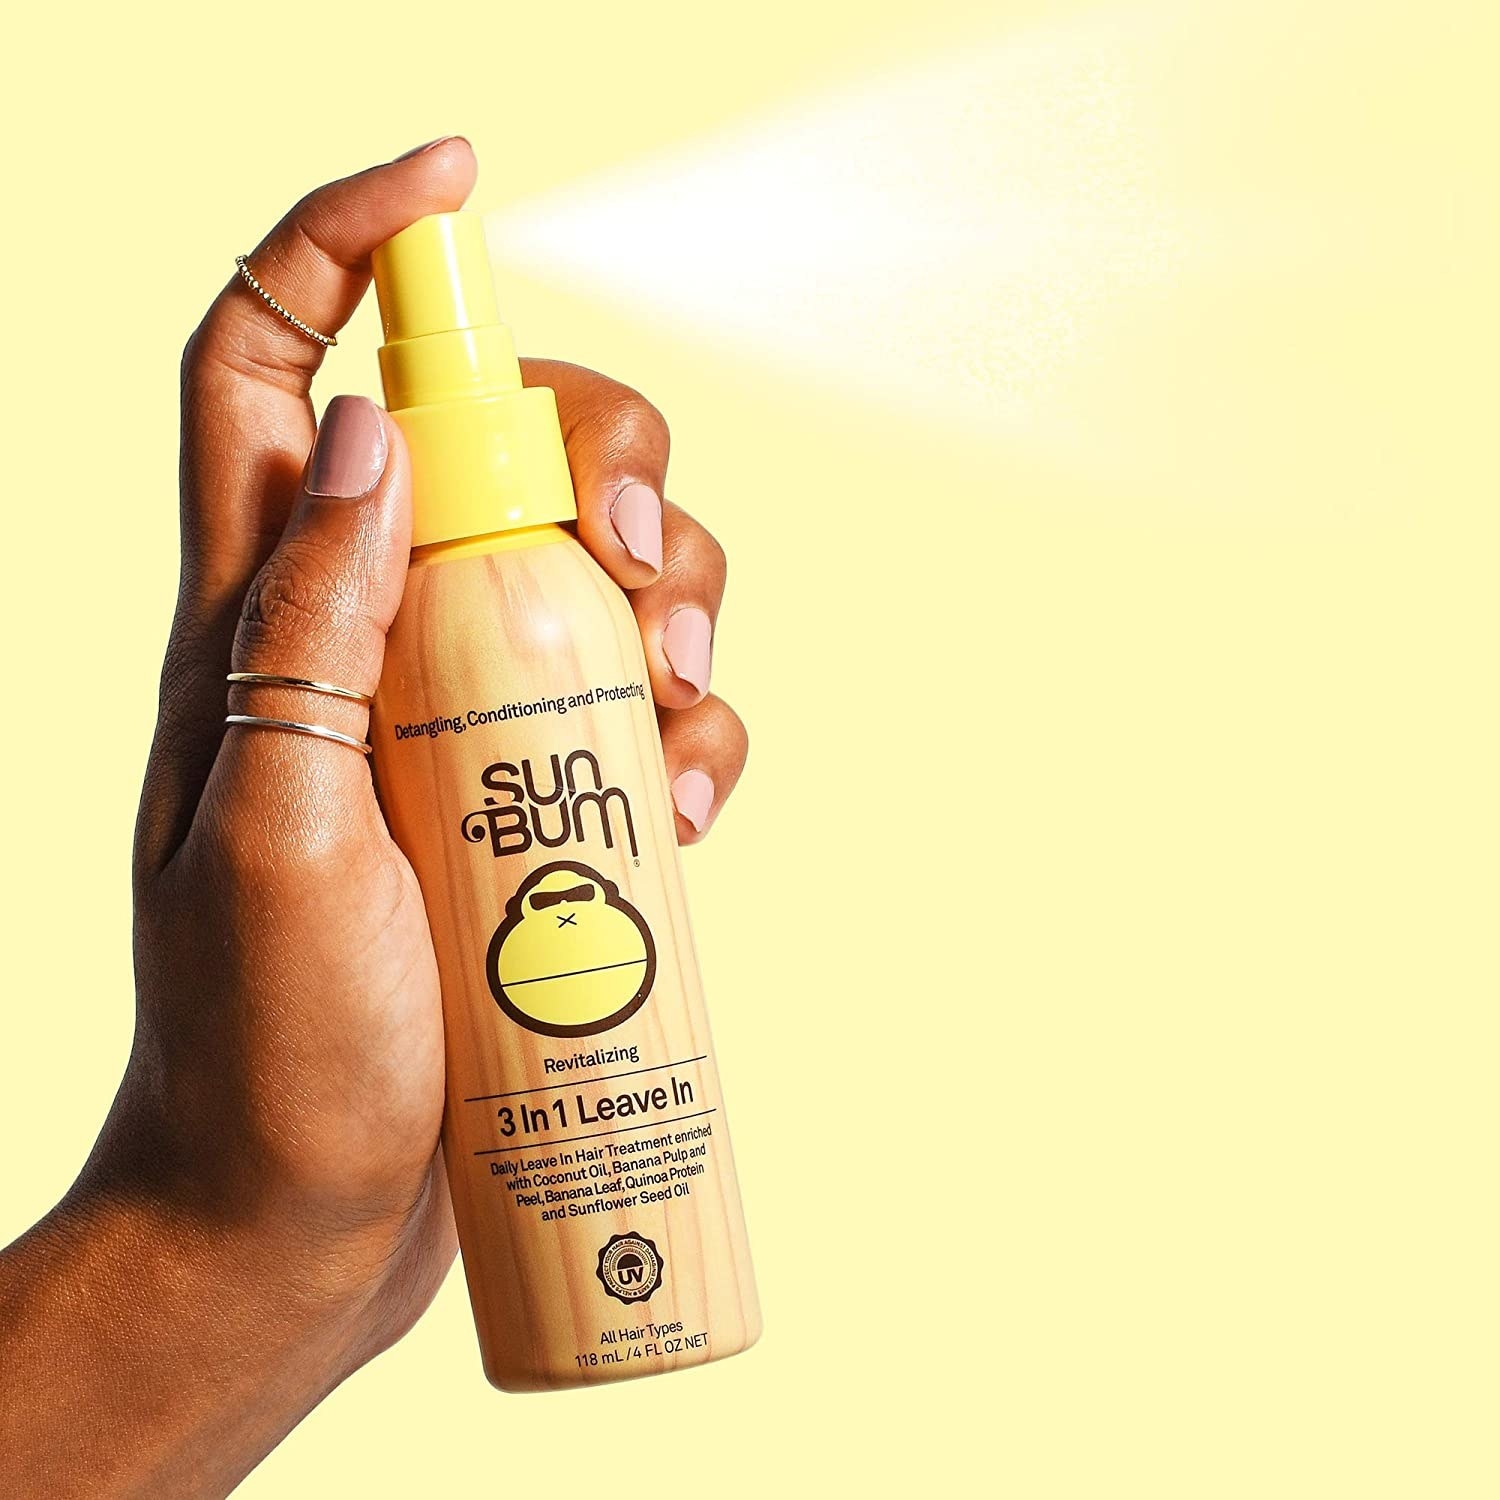 hand holding bottle with yellow spray nozzle labeled &quot;sun bum&quot; 